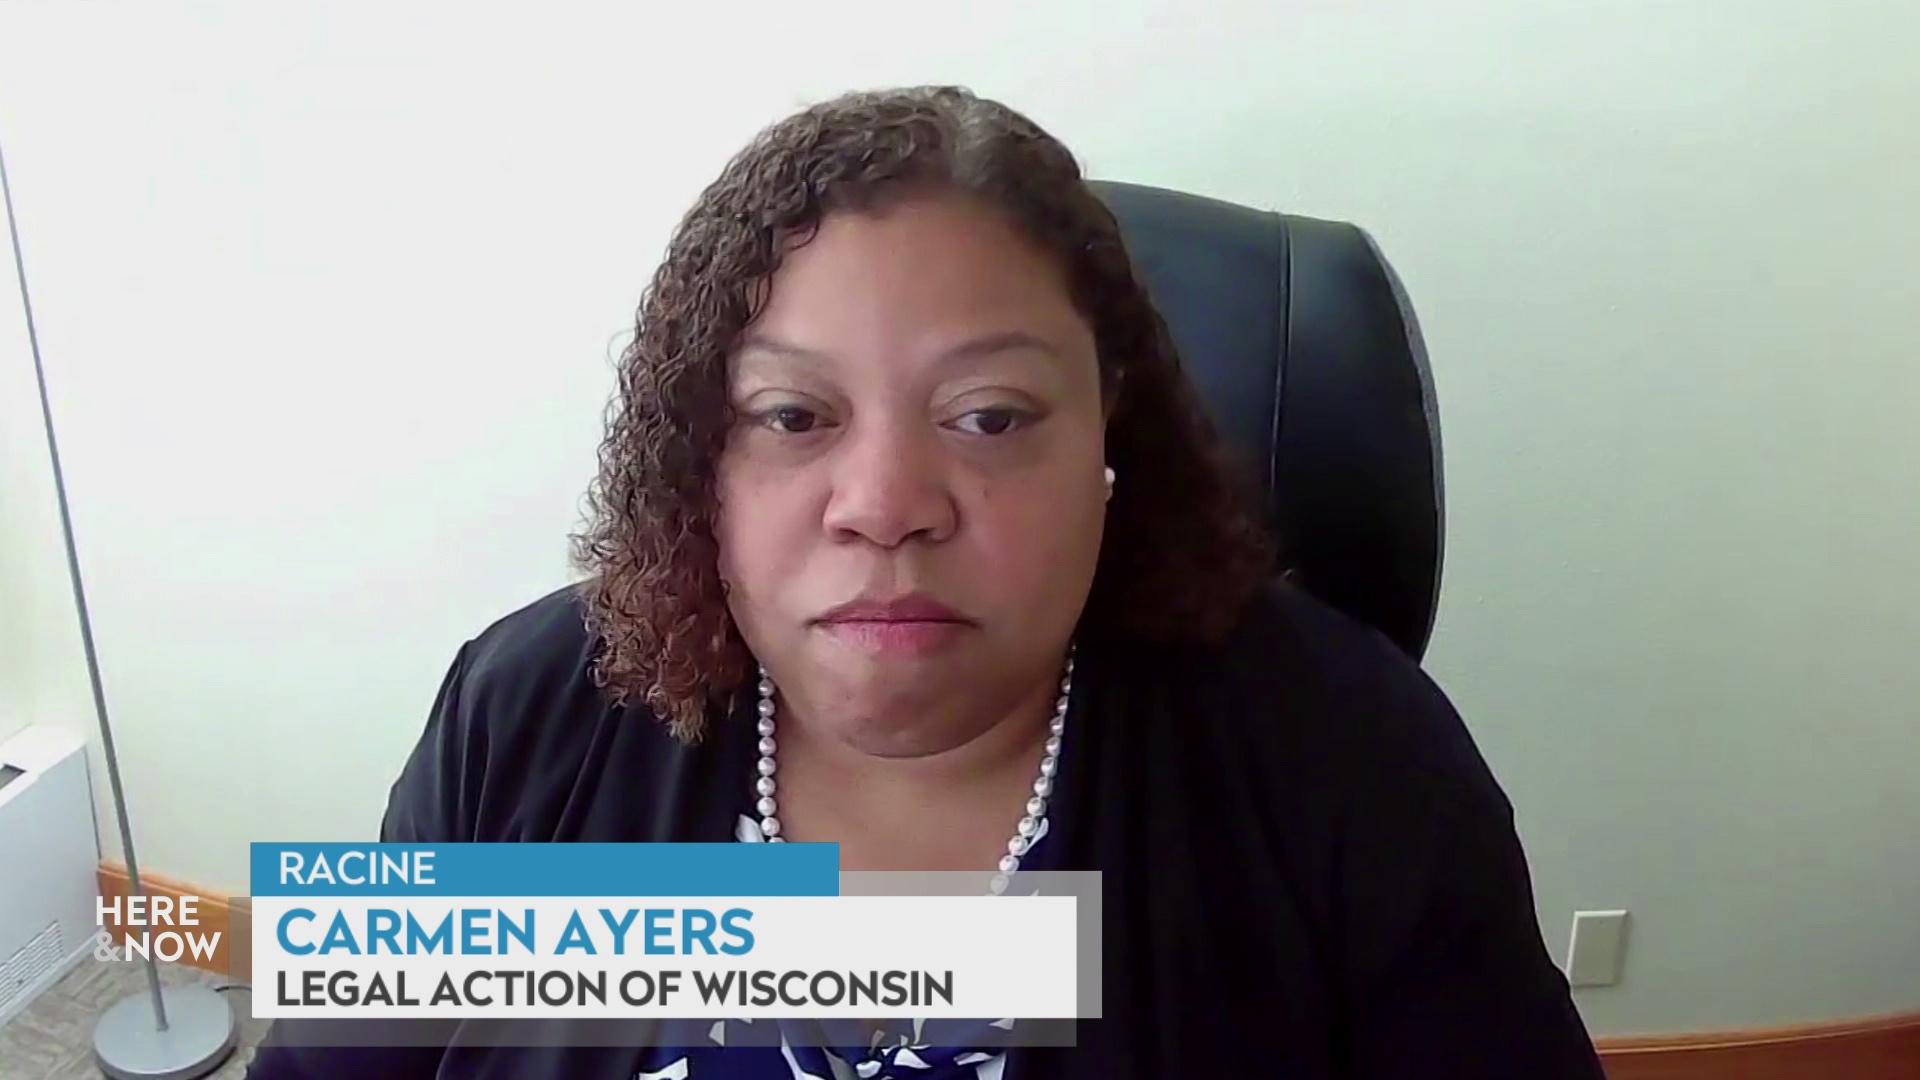 A still image from a video shows Carmen Ayers seated in a high-back black chair in front of a blank wall with a graphic at bottom reading 'Racine,' 'Carmen Ayers' and 'Legal Action of Wisconsin.'